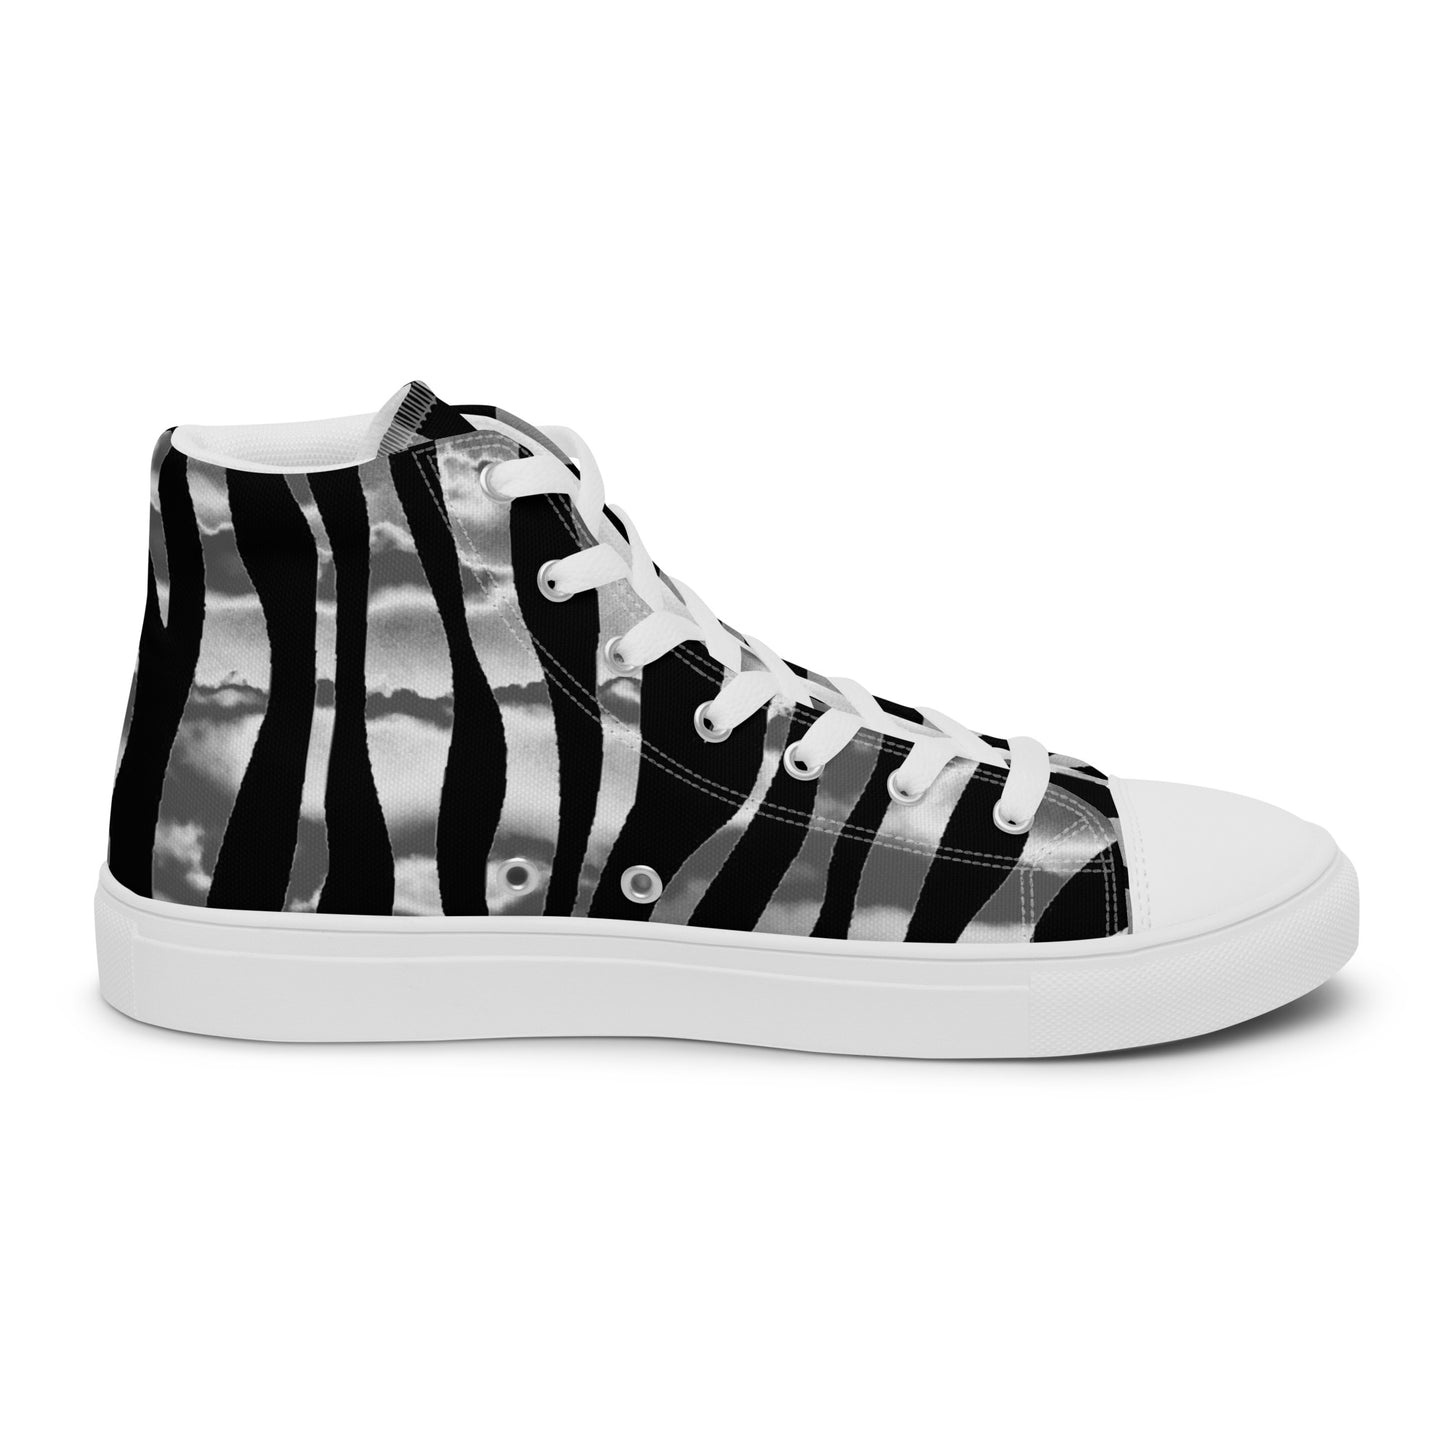 Snooty Fox Art Women’s High Top Canvas Shoes - Silver Tiger